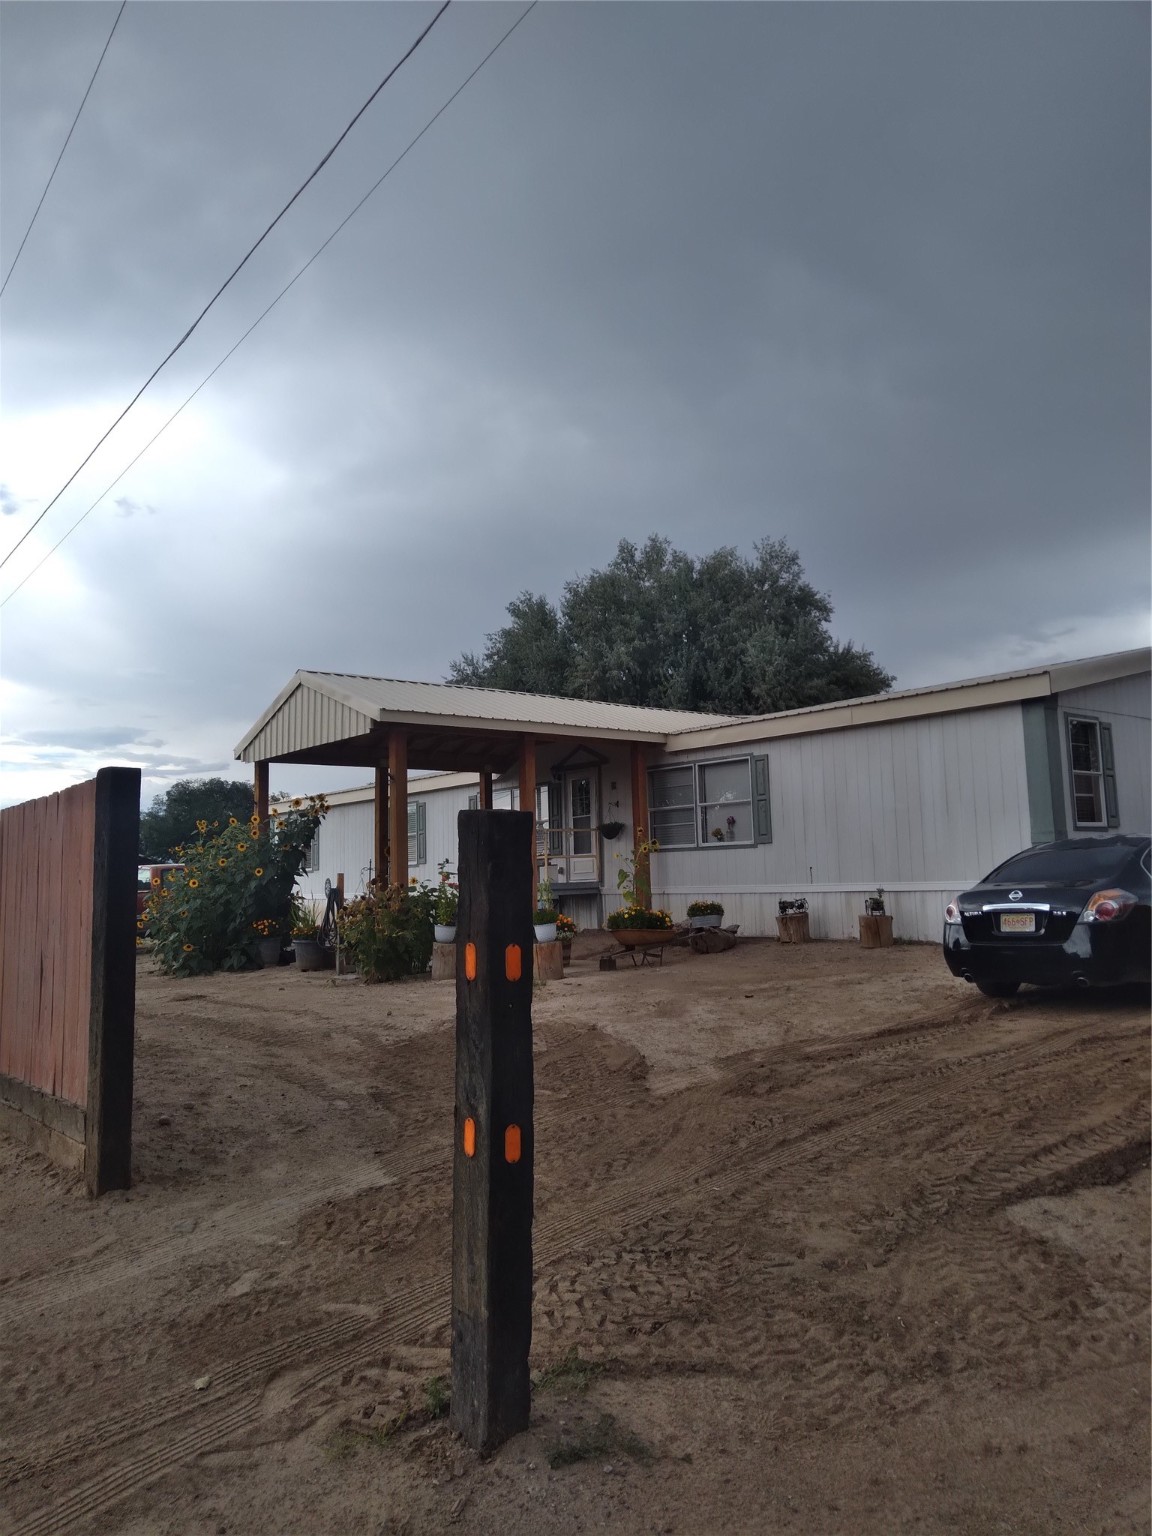 56 County Road 28, Chamita, New Mexico 87566, 4 Bedrooms Bedrooms, ,2 BathroomsBathrooms,Residential,For Sale,56 County Road 28,202233095